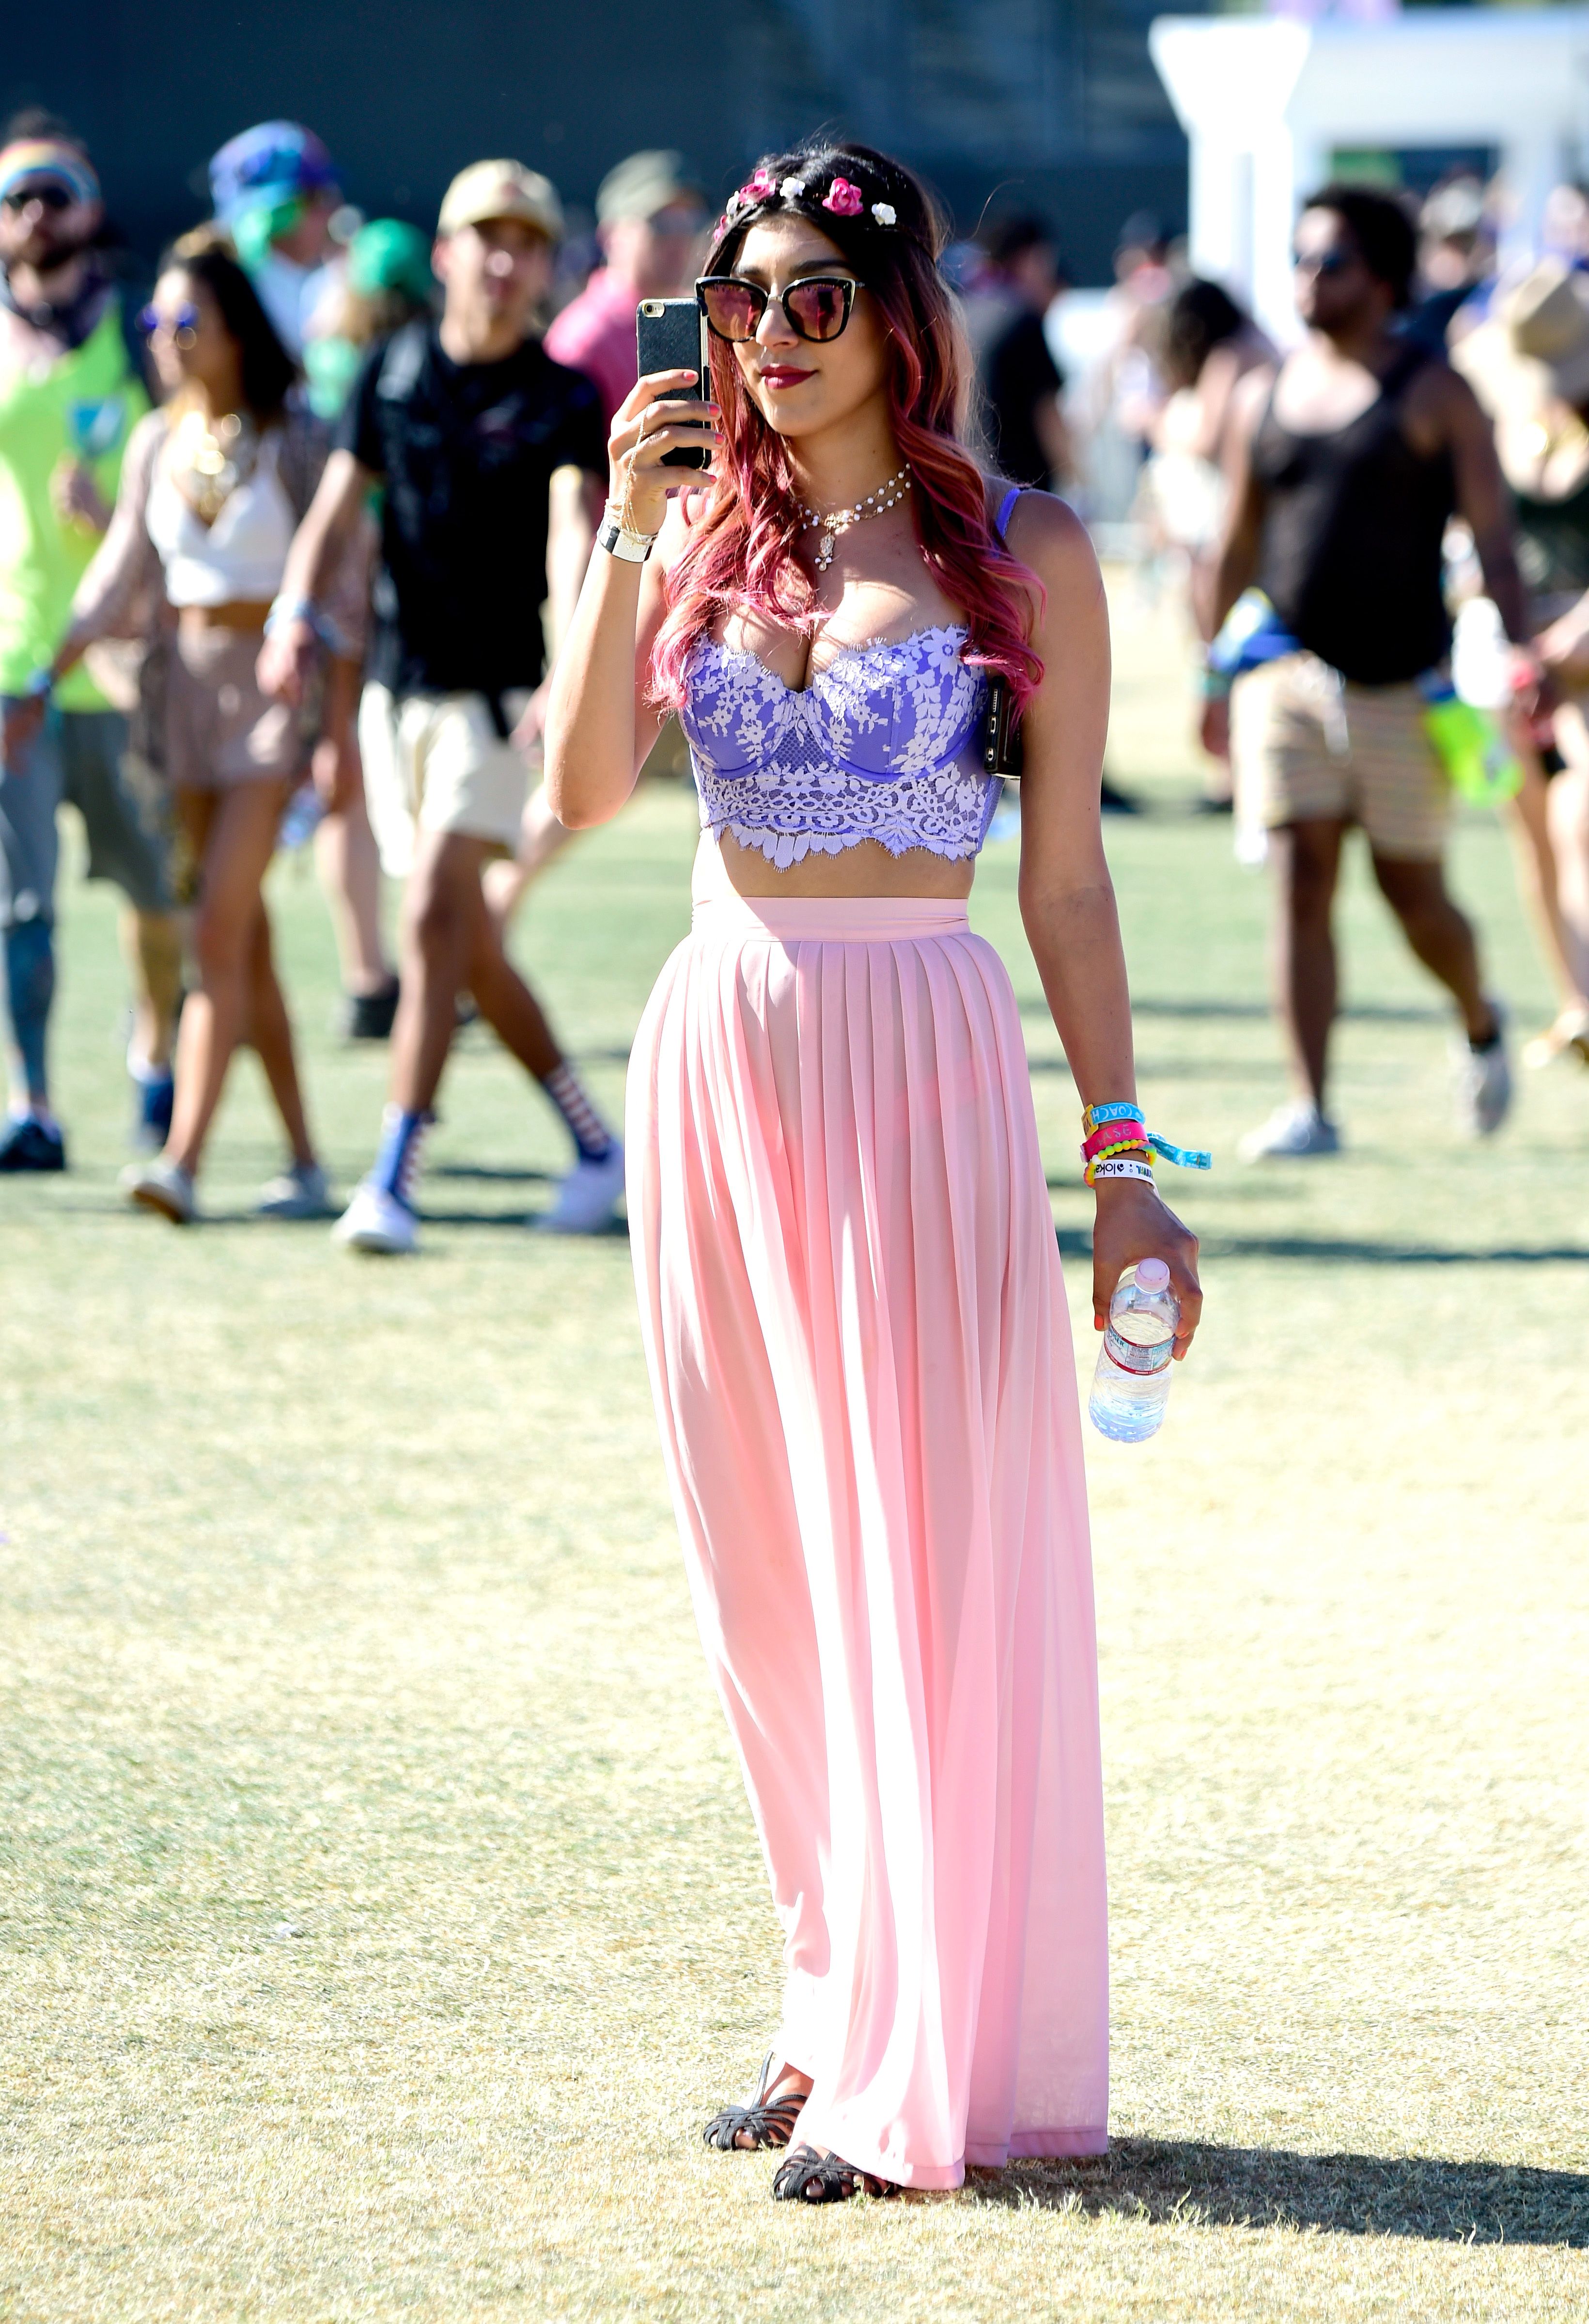 Coachella 2022 Outfit Predictions - Is Festival Fashion Out?